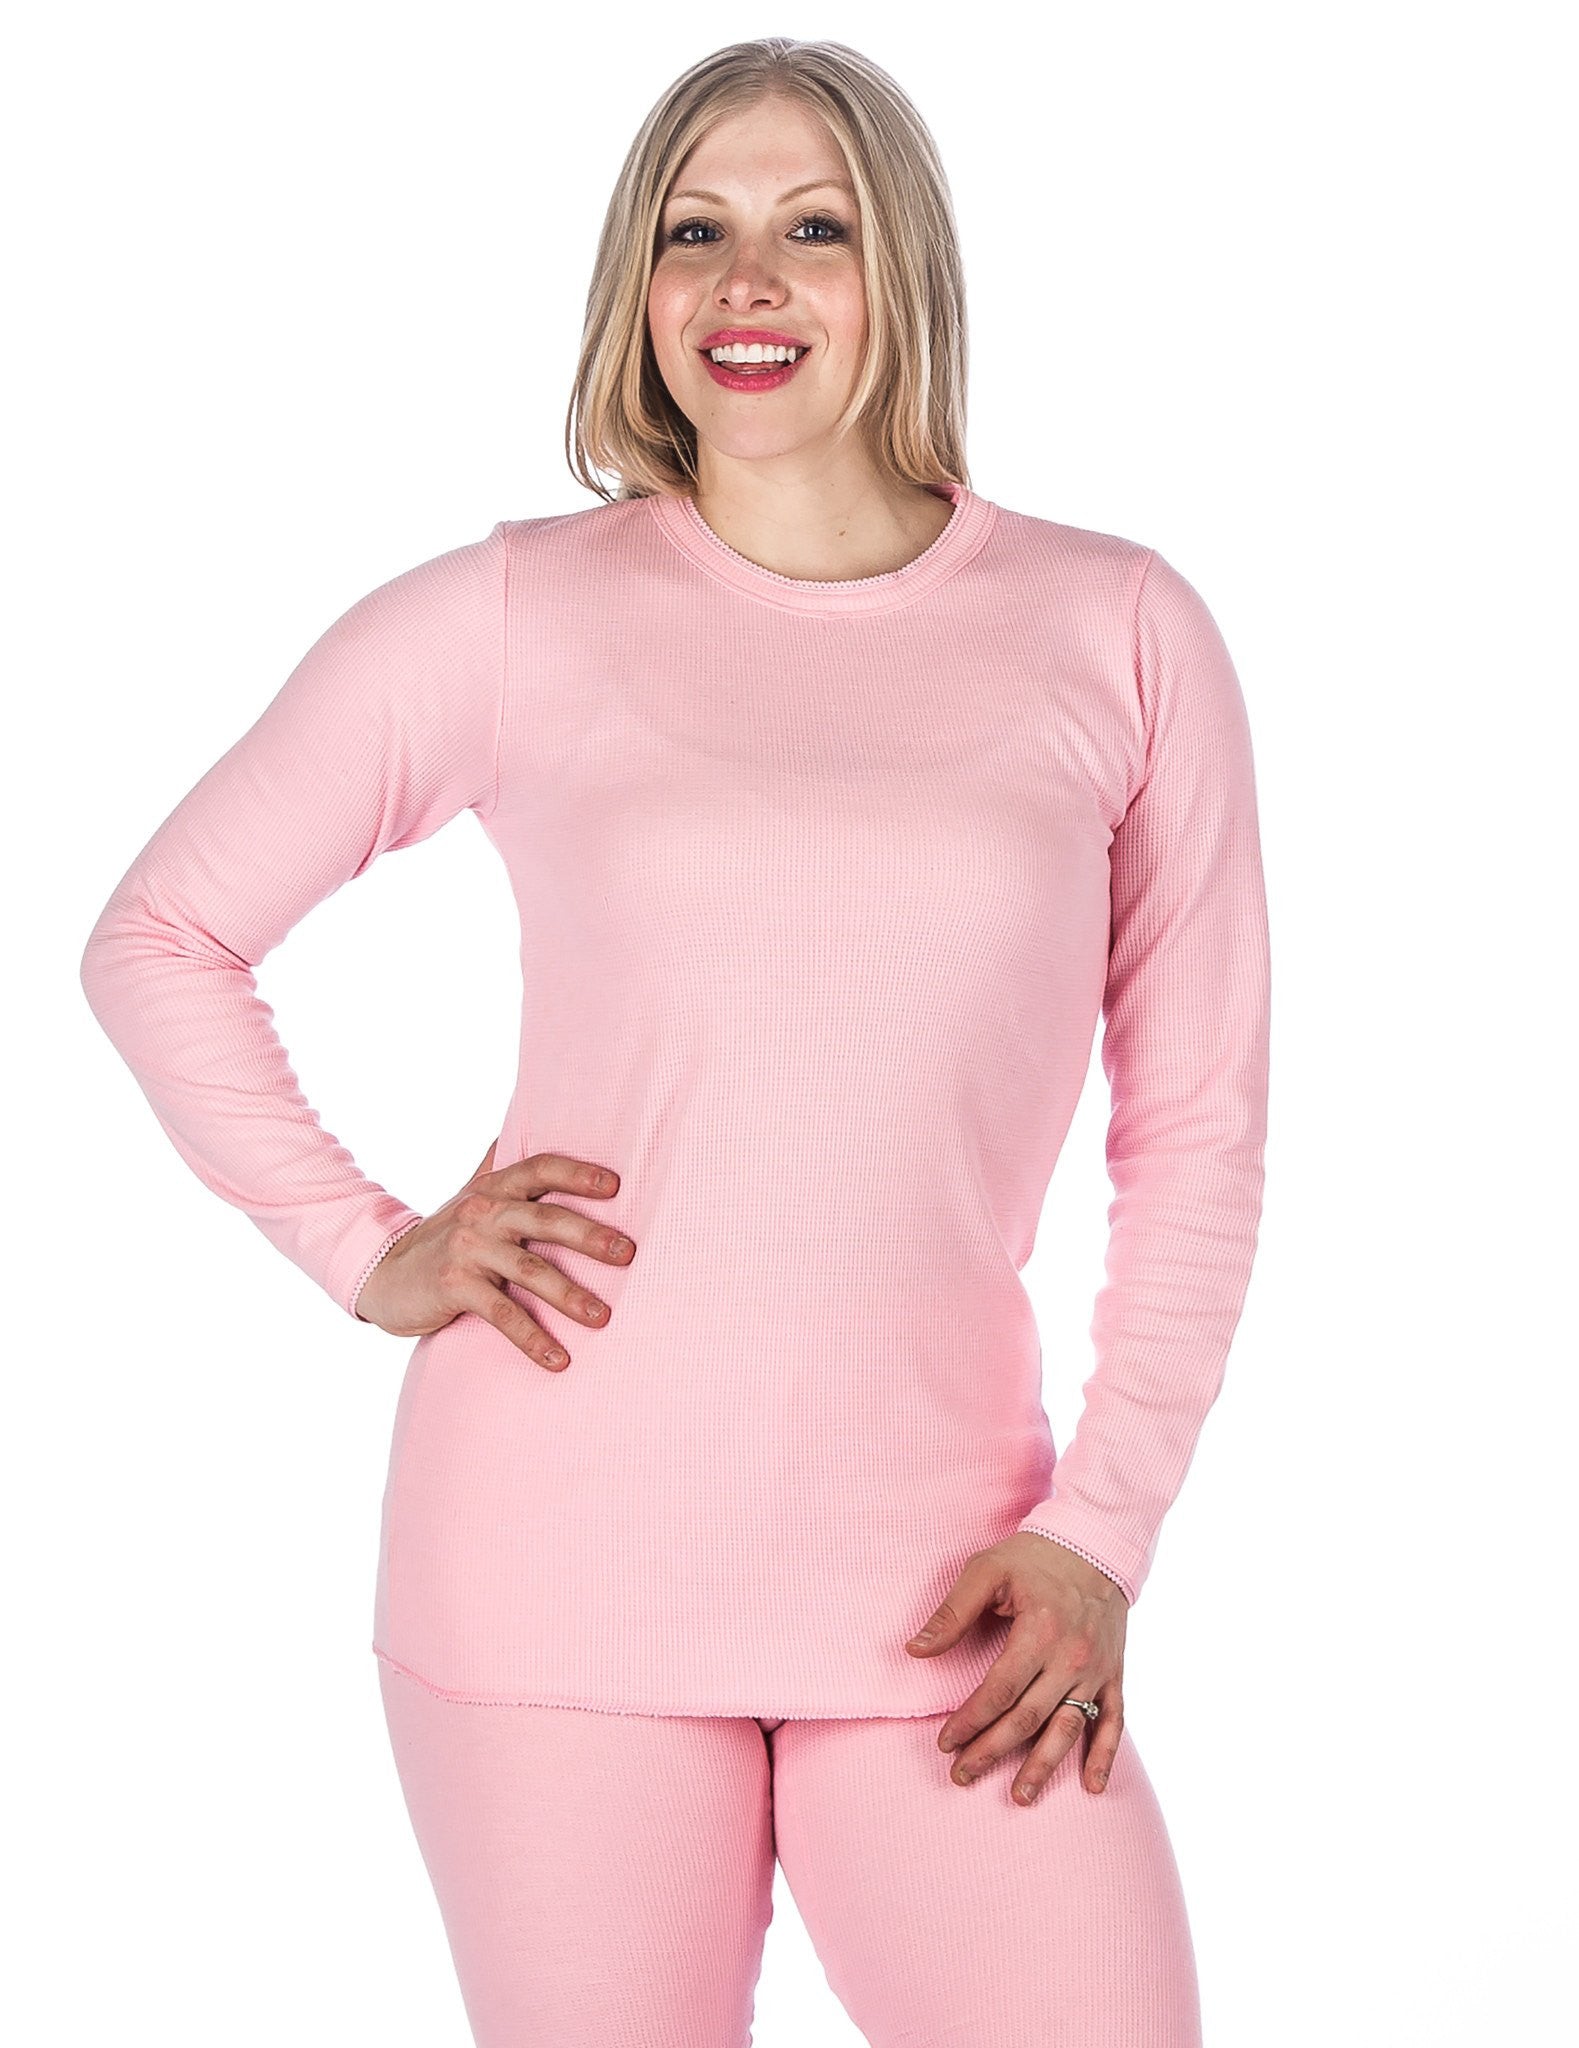 Women's Classic Waffle Knit Thermal Crew Top